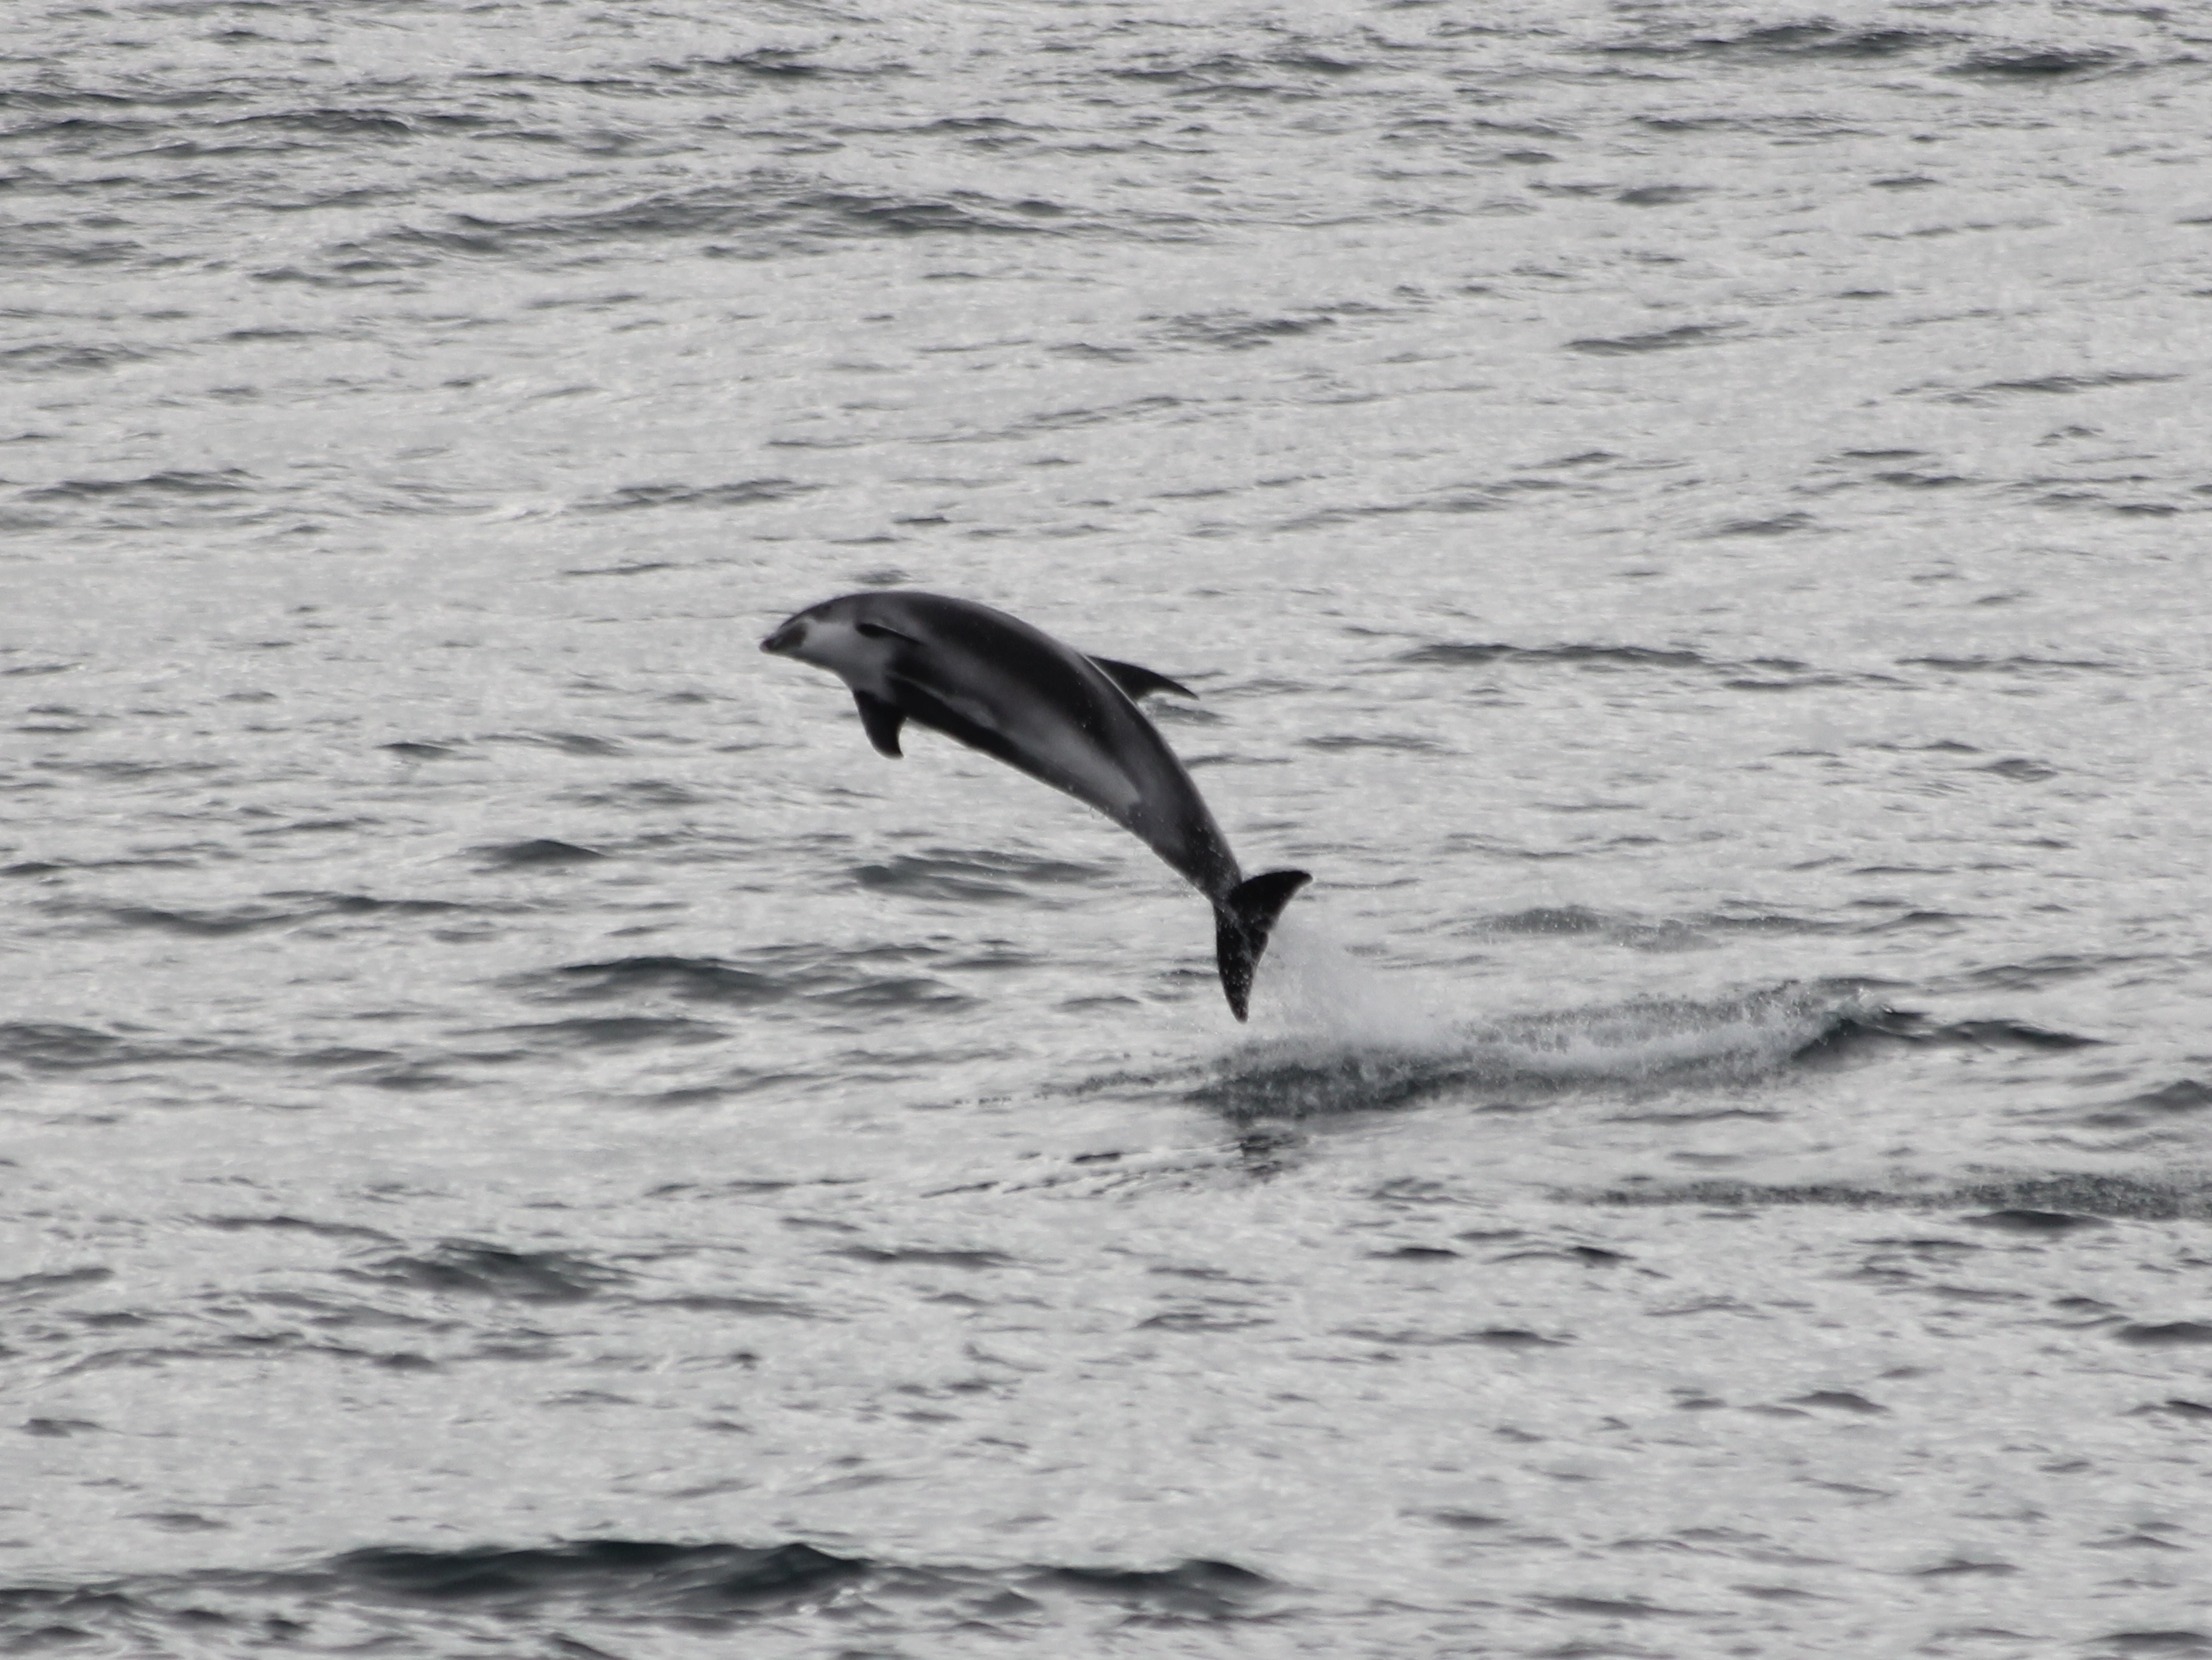 A playful white-beaked dolphin